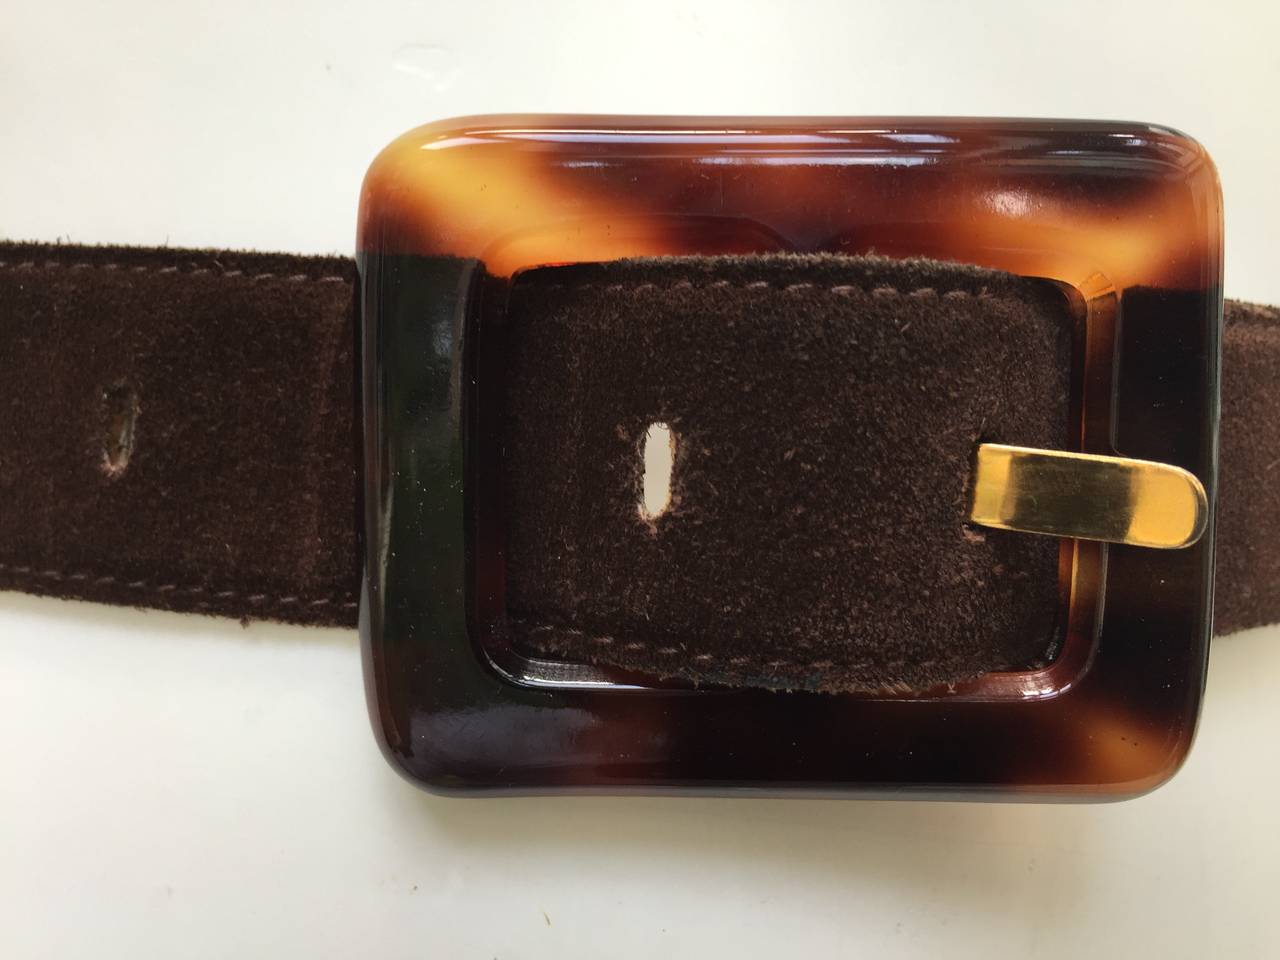 Yves Saint Laurent 1980s brown suede tortoiseshell buckle belt size medium but please see measurement.  This belt will fit anyone size 2 - 4 . 
33